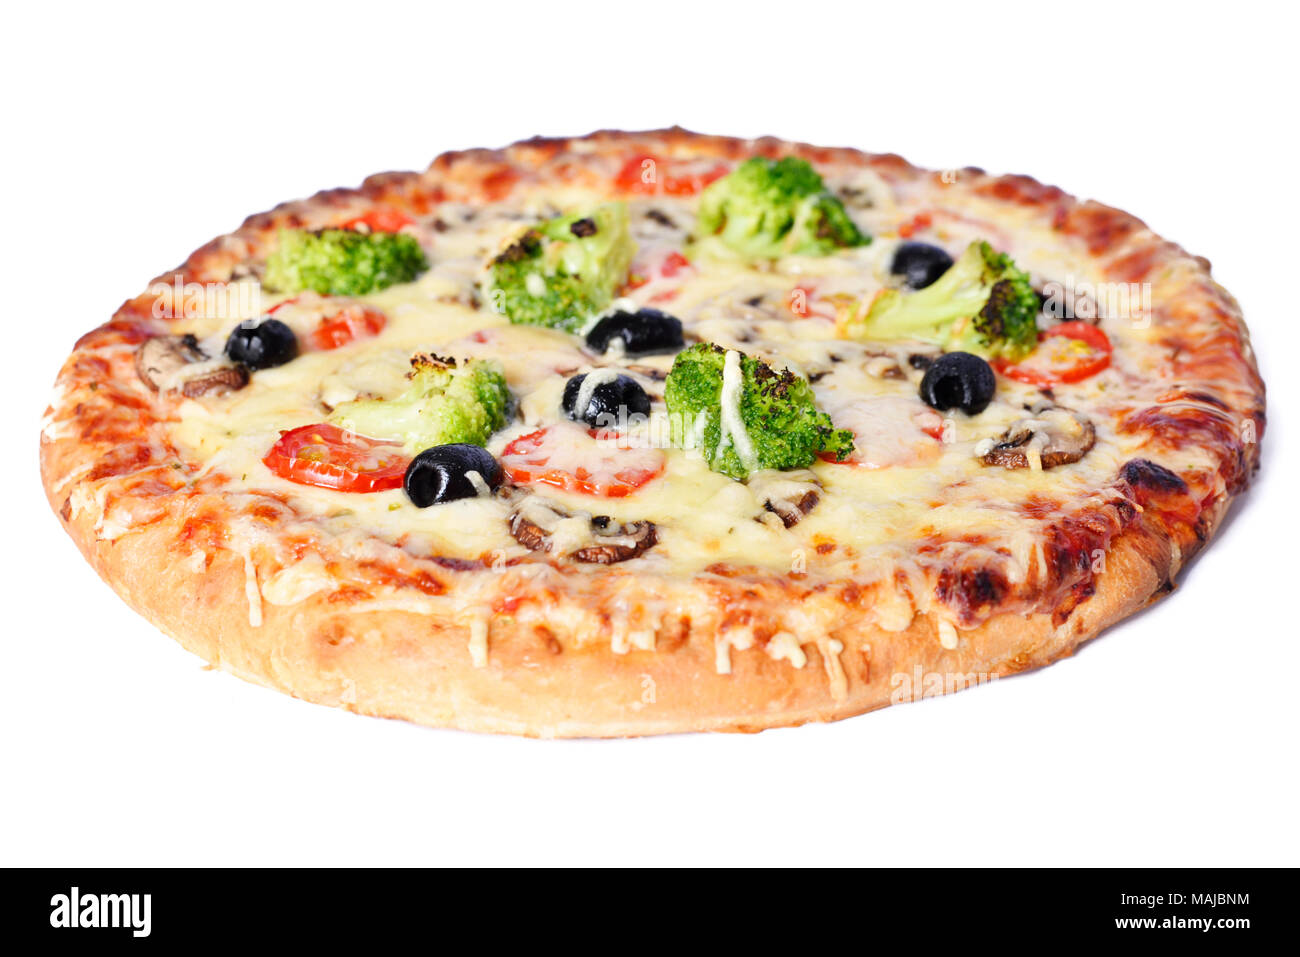 Vegetable pizza, isolated on white background.High angle view of a vegetarian pizza with mushrooms, fresh tomatoes, olives, broccoli and cheese. Stock Photo